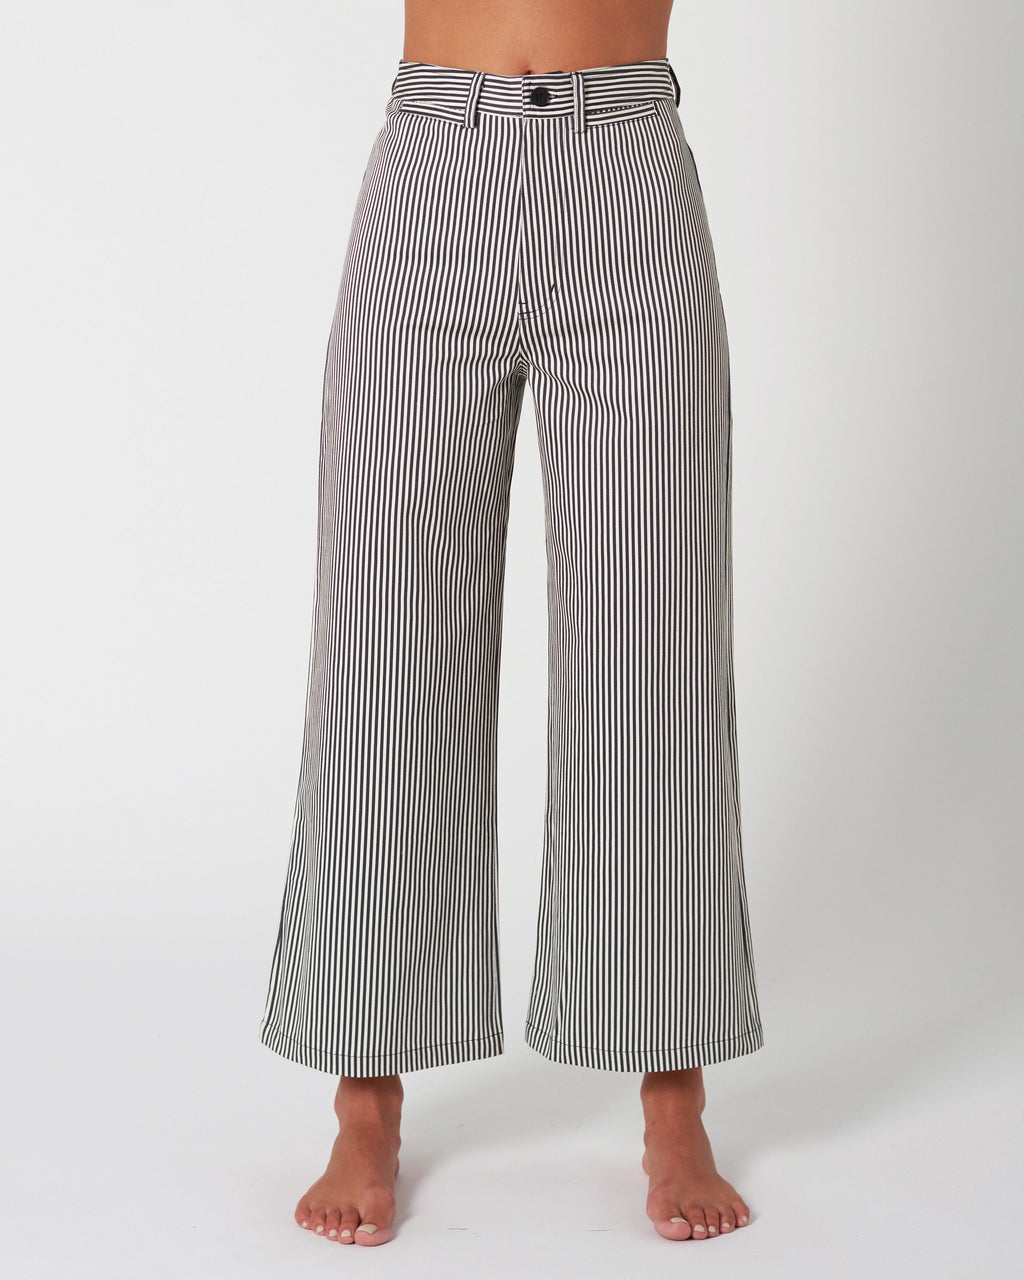 Rolla's Sailor Pant - More Relaxed Fit SALE